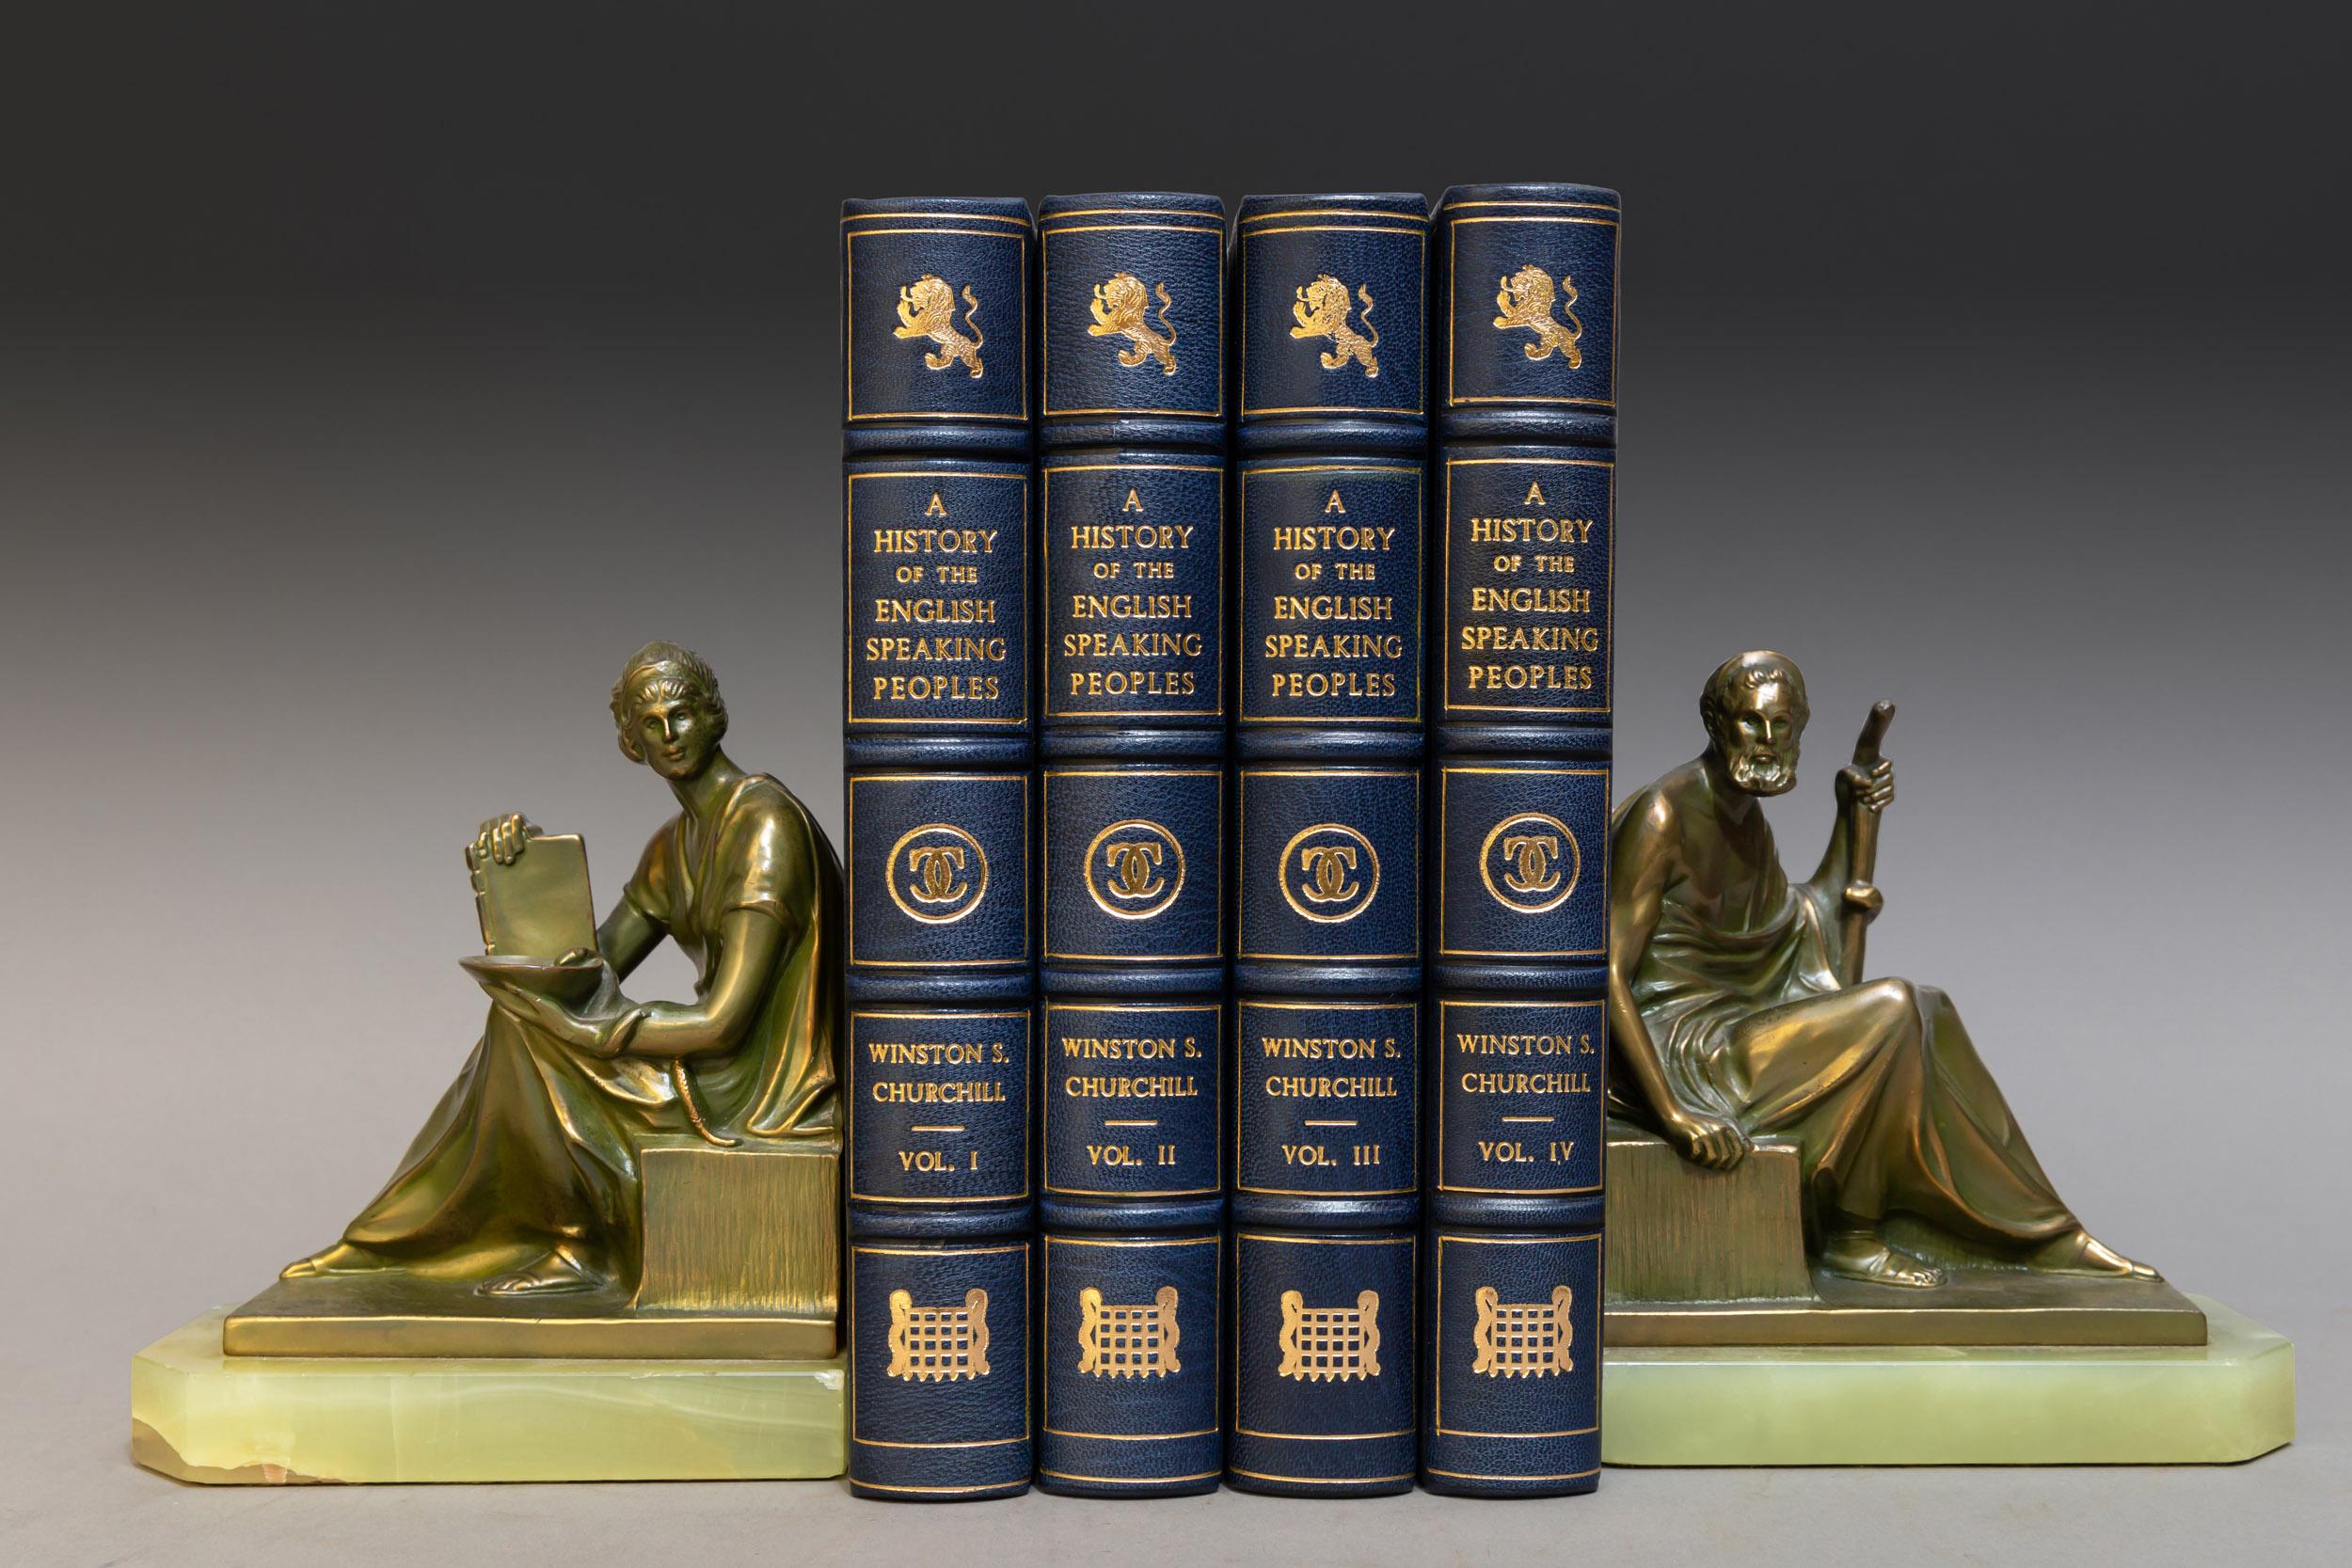 4 Volumes

Rebound In Full Blue Morocco, All Edges Gilt, Raised Bands, Ornate Gilt On Spines And Covers, Marbled Endpapers. 
Illustrated. 

Published: London: Cassell and Co. 1956-1958. 

First Edition 

Handsome set.